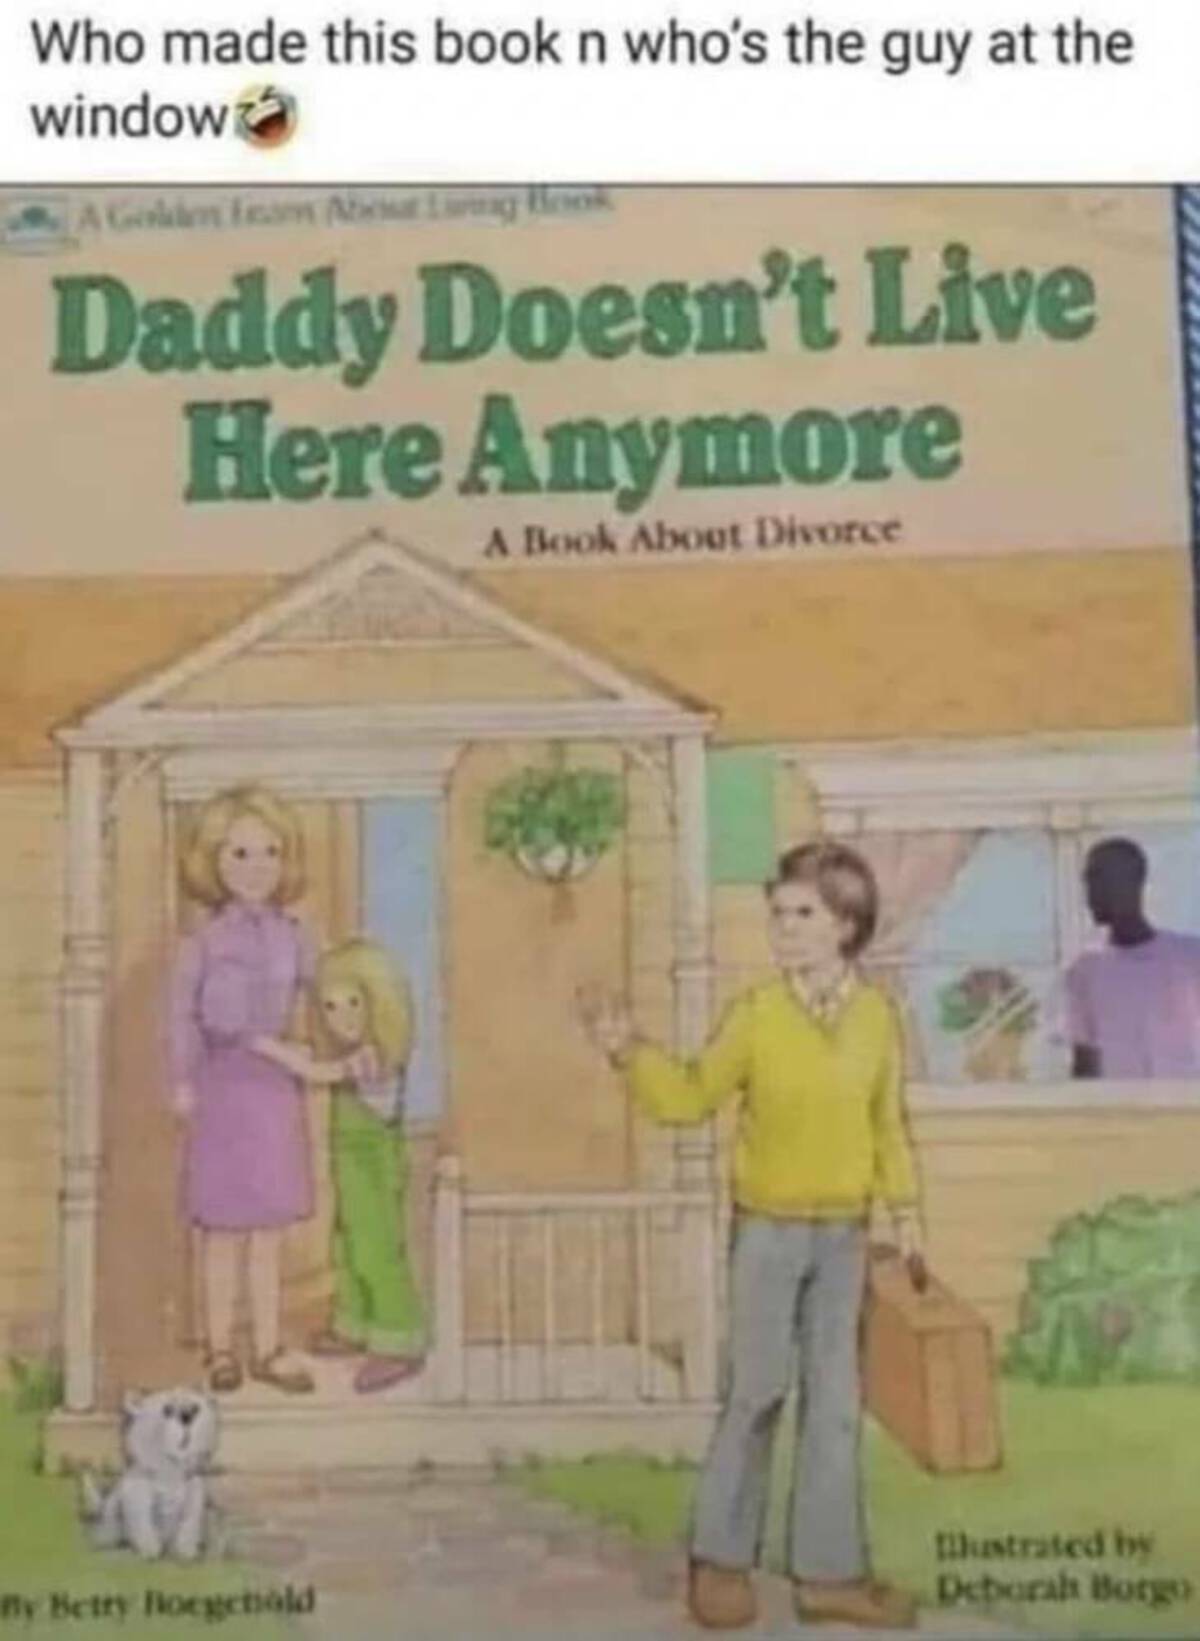 daddy doesn t live here anymore - Who made this book n who's the guy at the window A Golden Fam About Laring Book Daddy Doesn't Live Here Anymore A Book About Divorce nly Betty Borgehold lustrated by Deborah Borgo